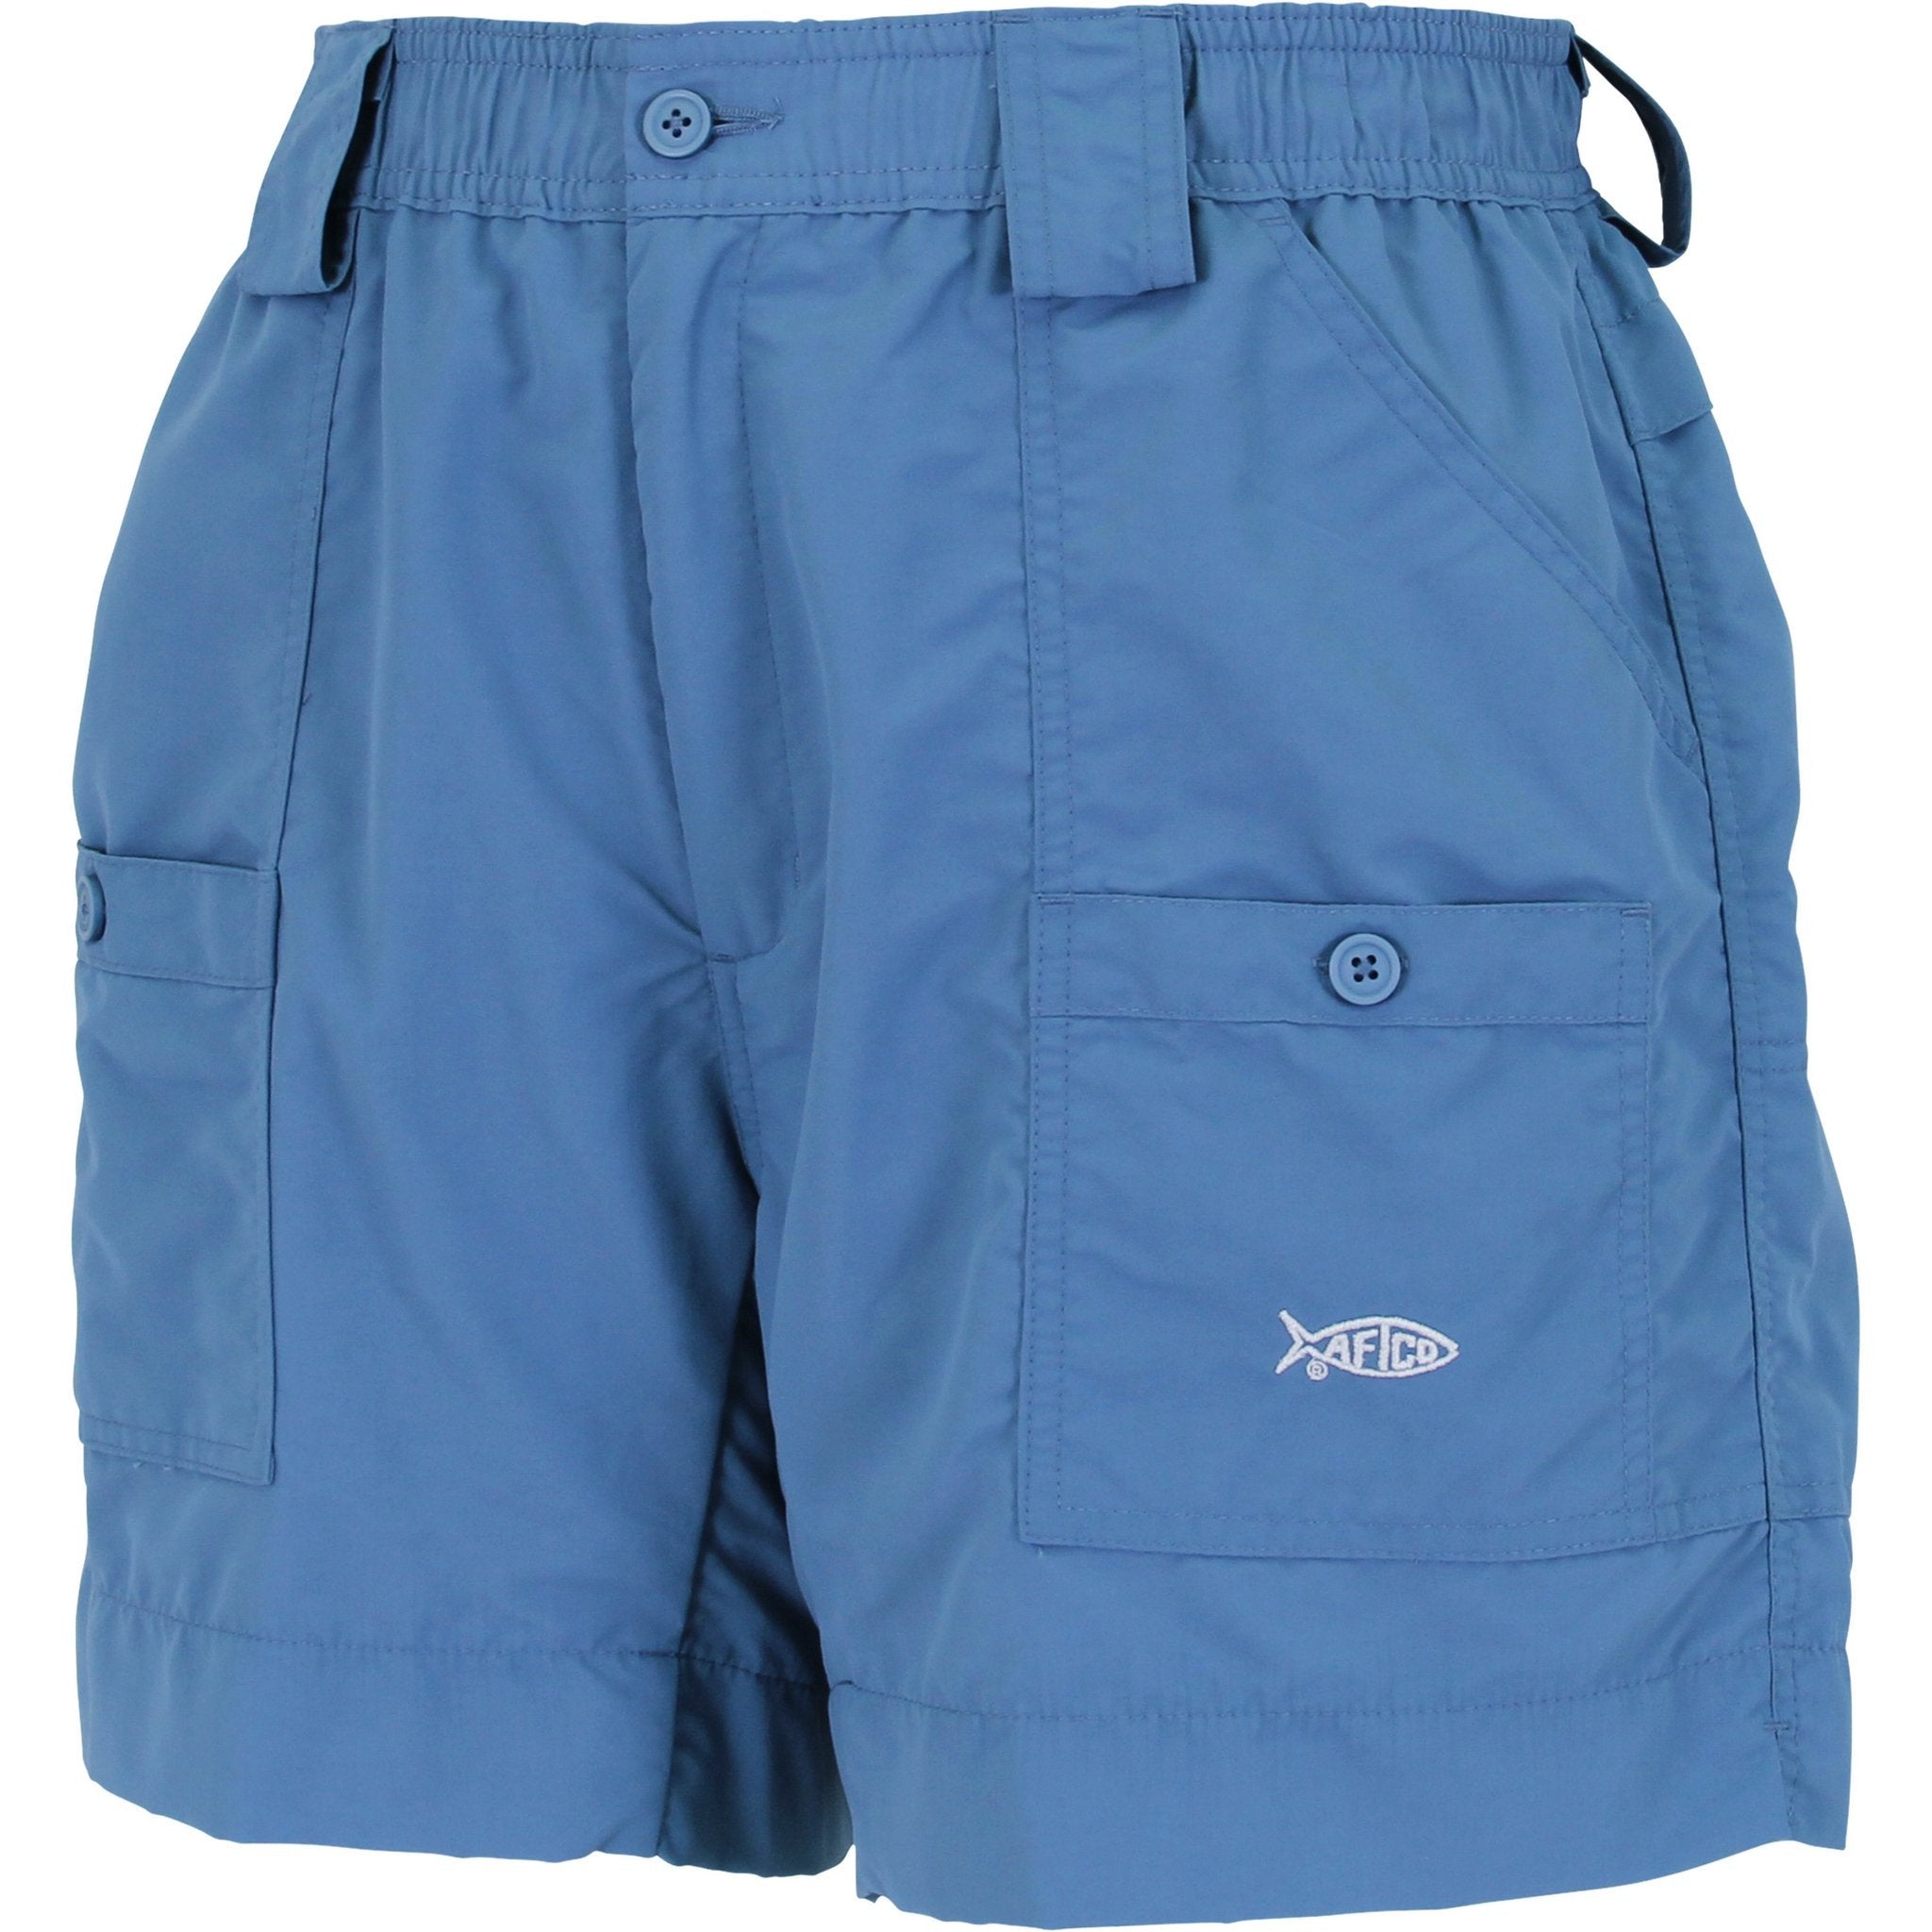 AFTCO Original Fishing Short - Air Force Blue – Crook and Crook Fishing ...